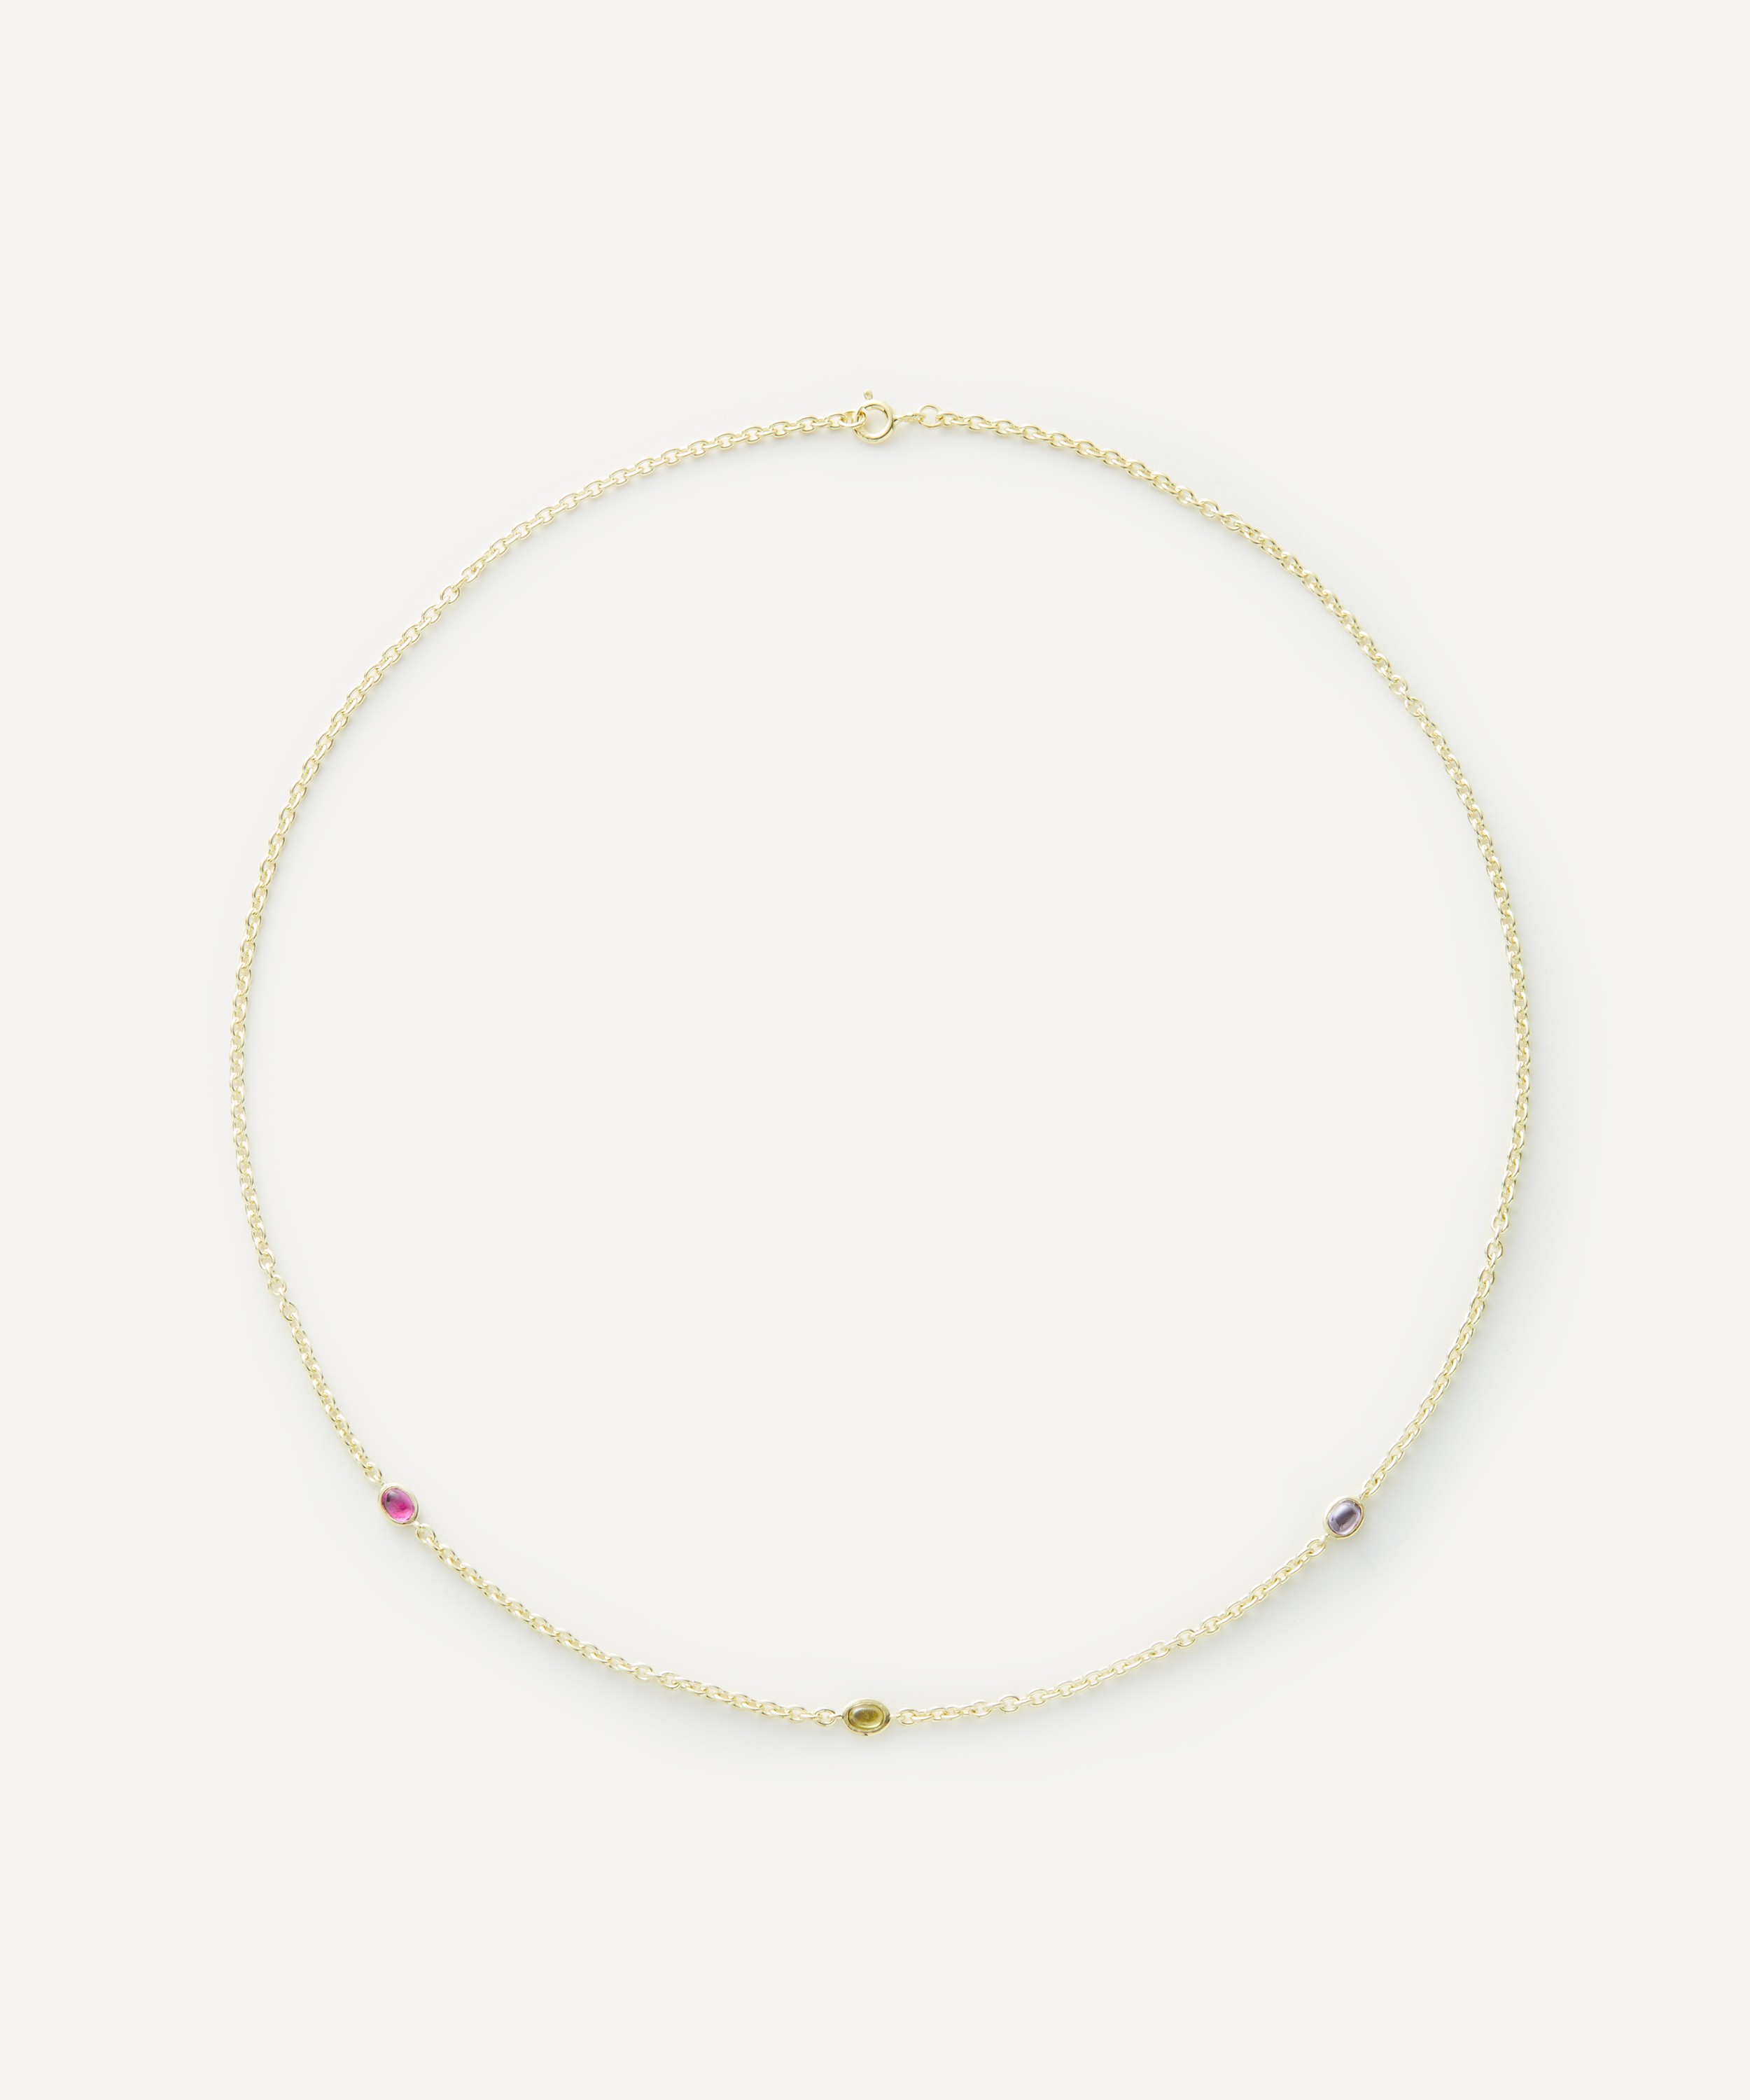 Anna + Nina - 14ct Gold-Plated Ziggy Chain Necklace